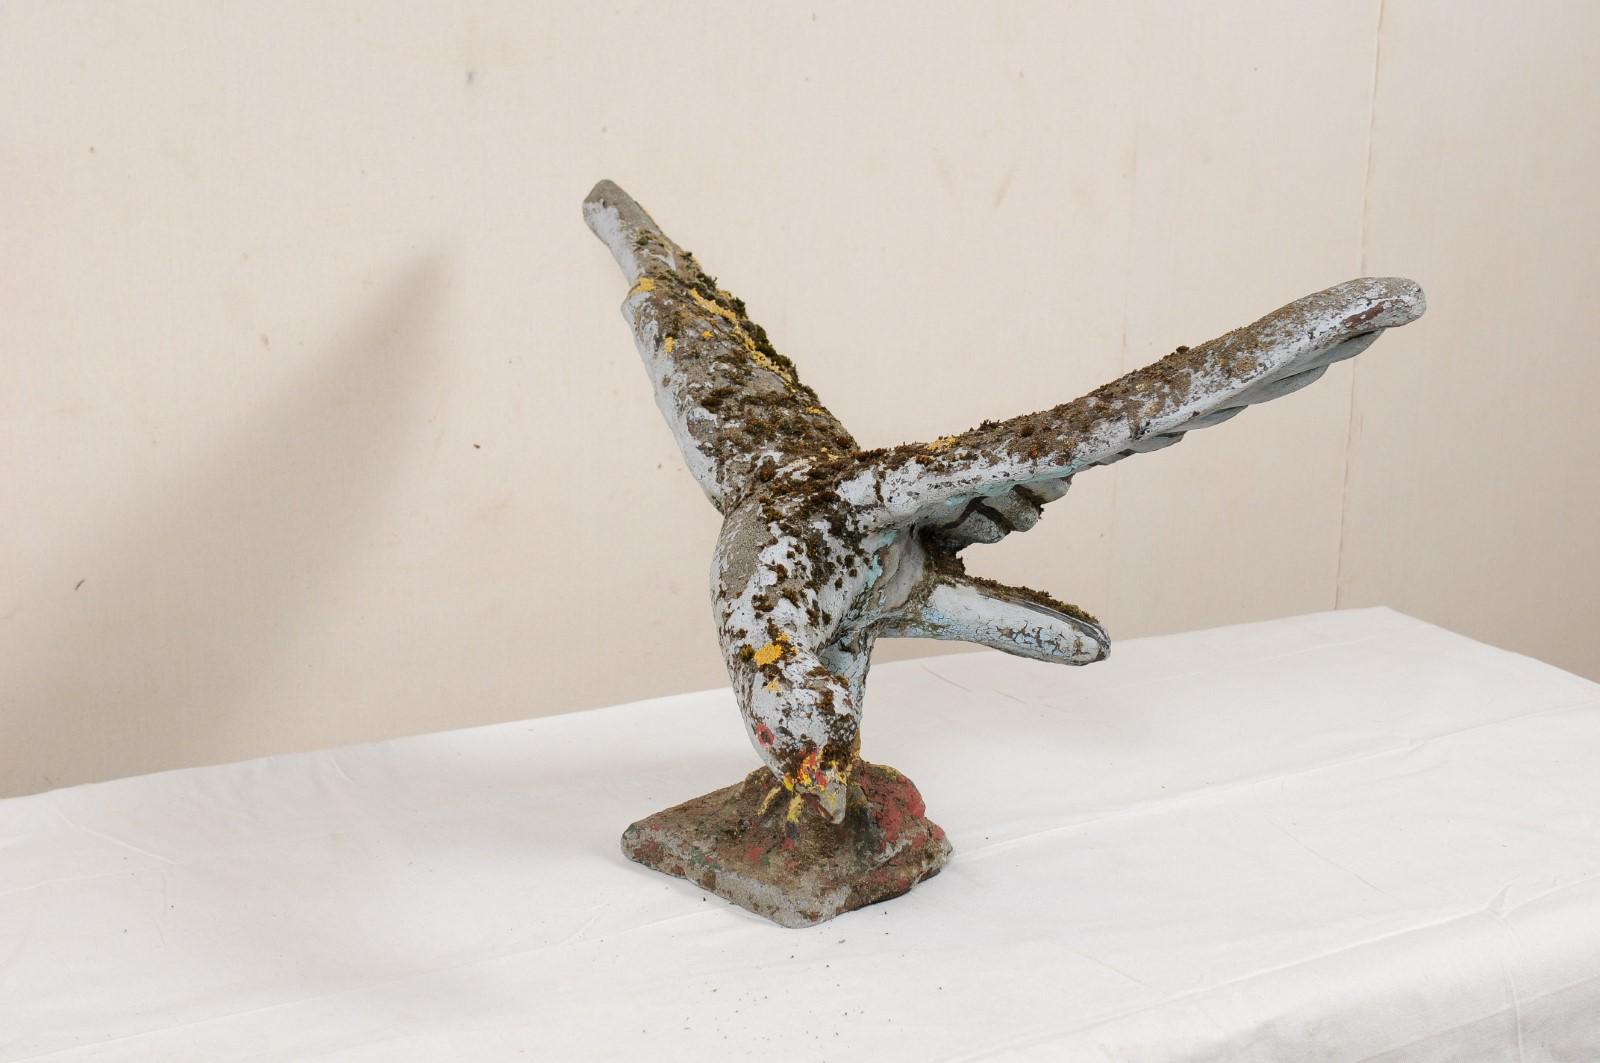 A French bird garden statue in case stone from the mid 20th century. This mid-century statue from France, created in cast-stone, in the image of a bird, standing with head inquisitively down and wings spread upward. This sculptural figure stands